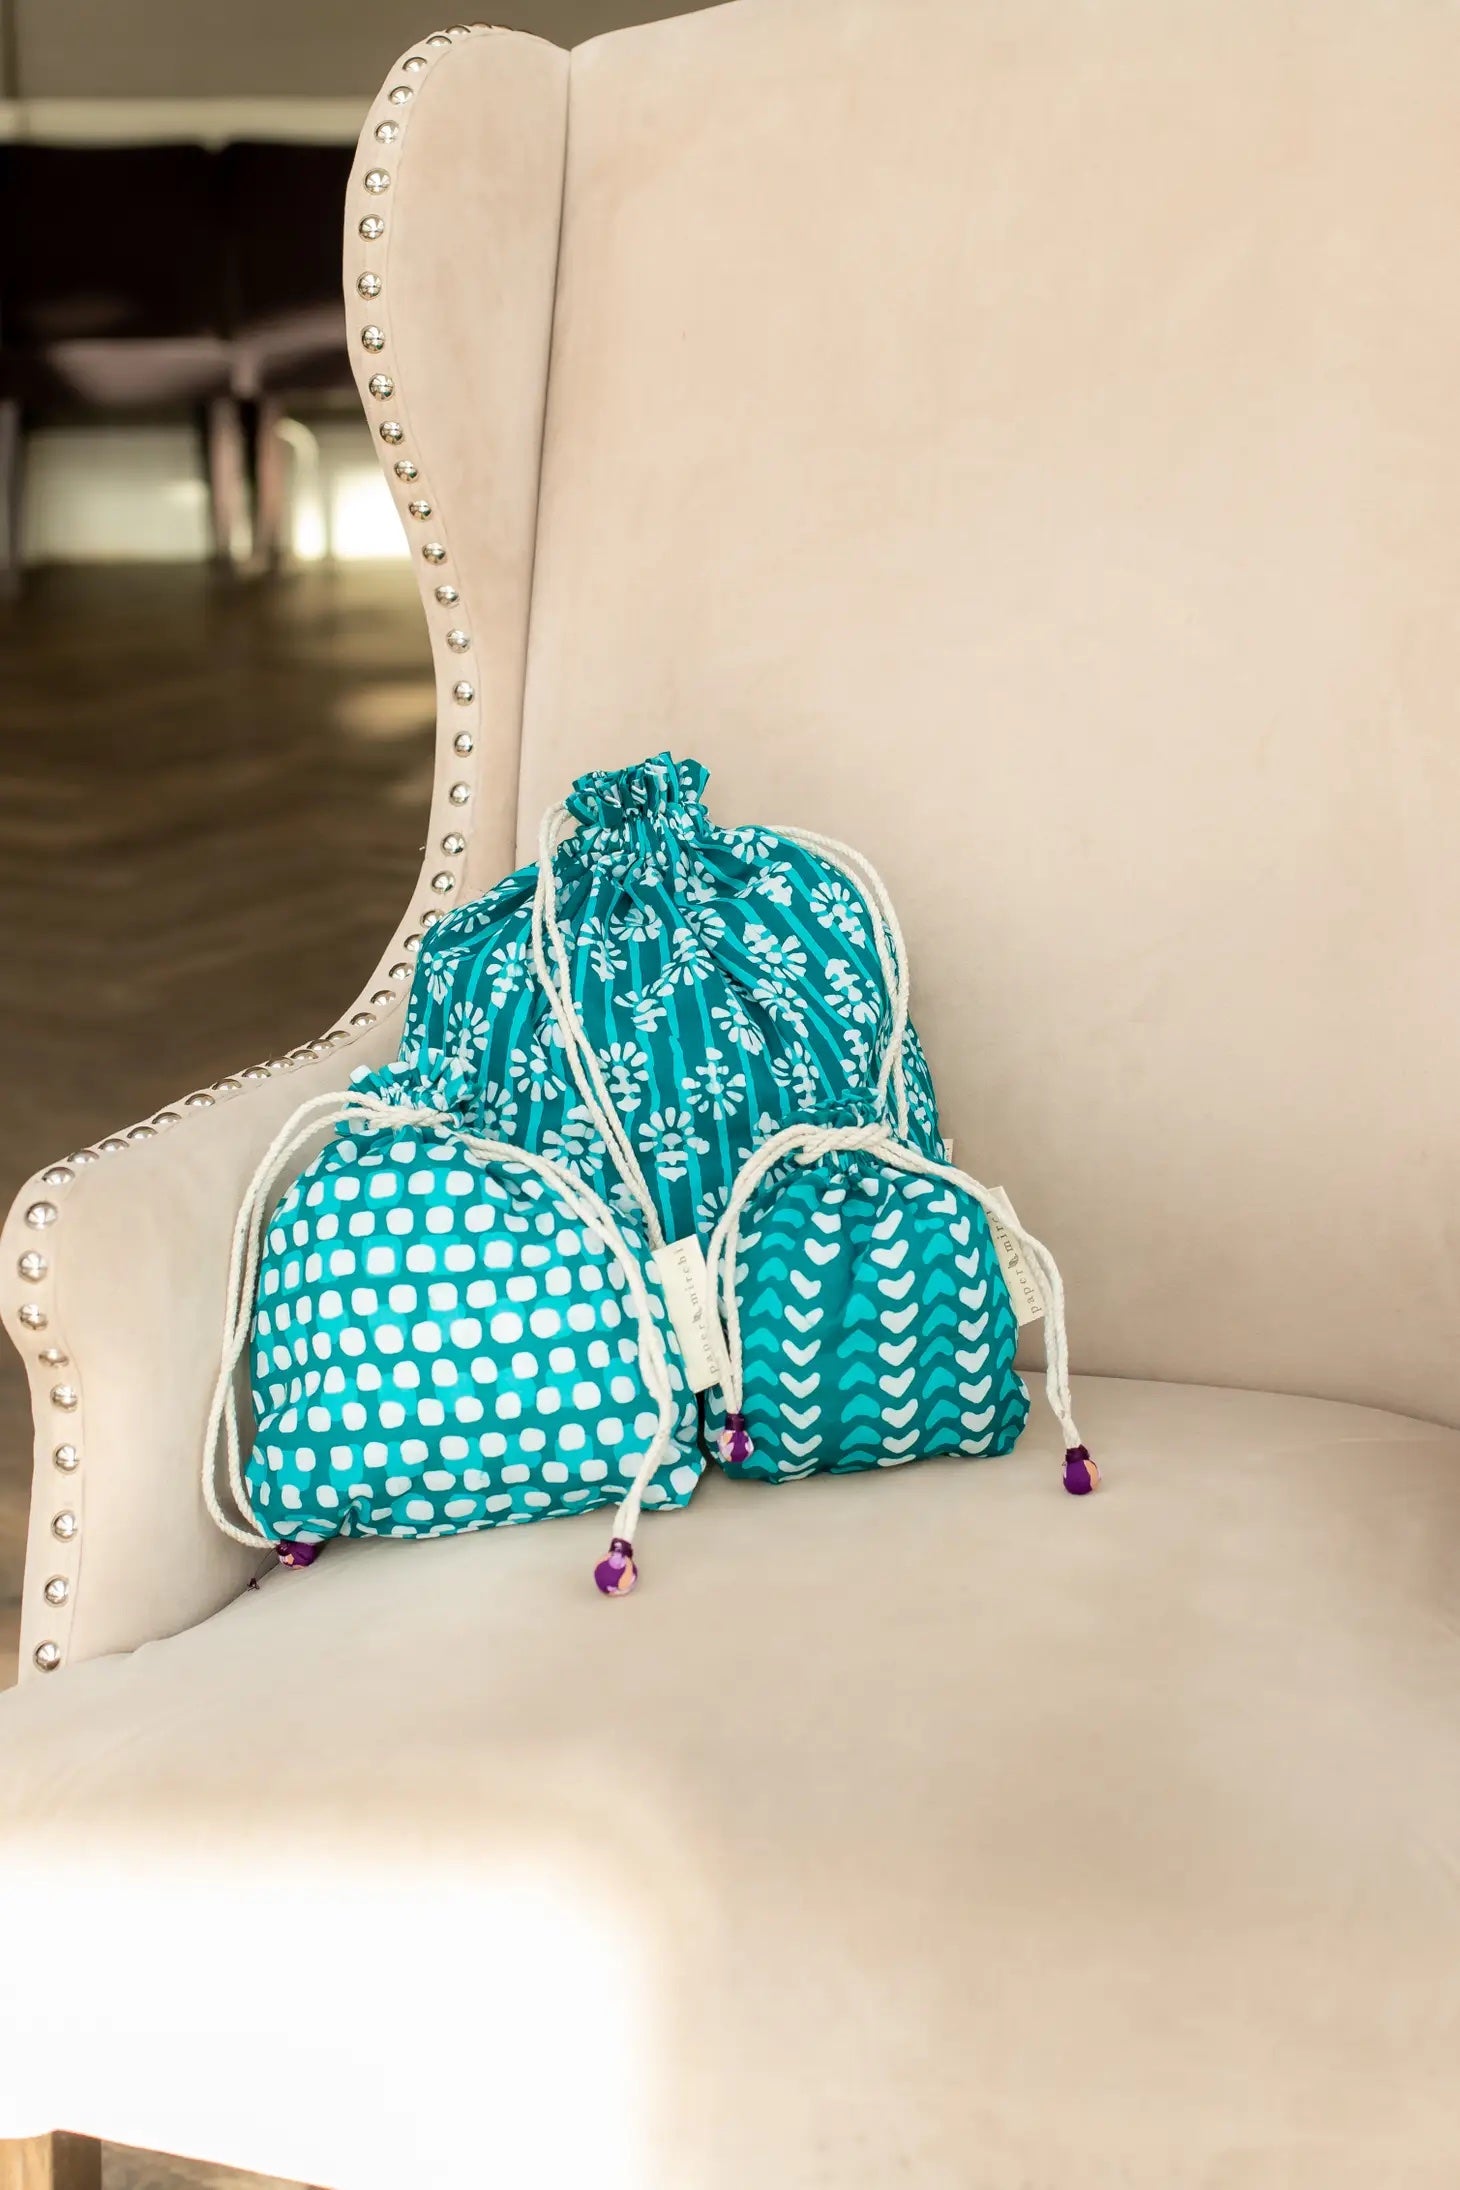 Teal bags - hearts, squares & flowers